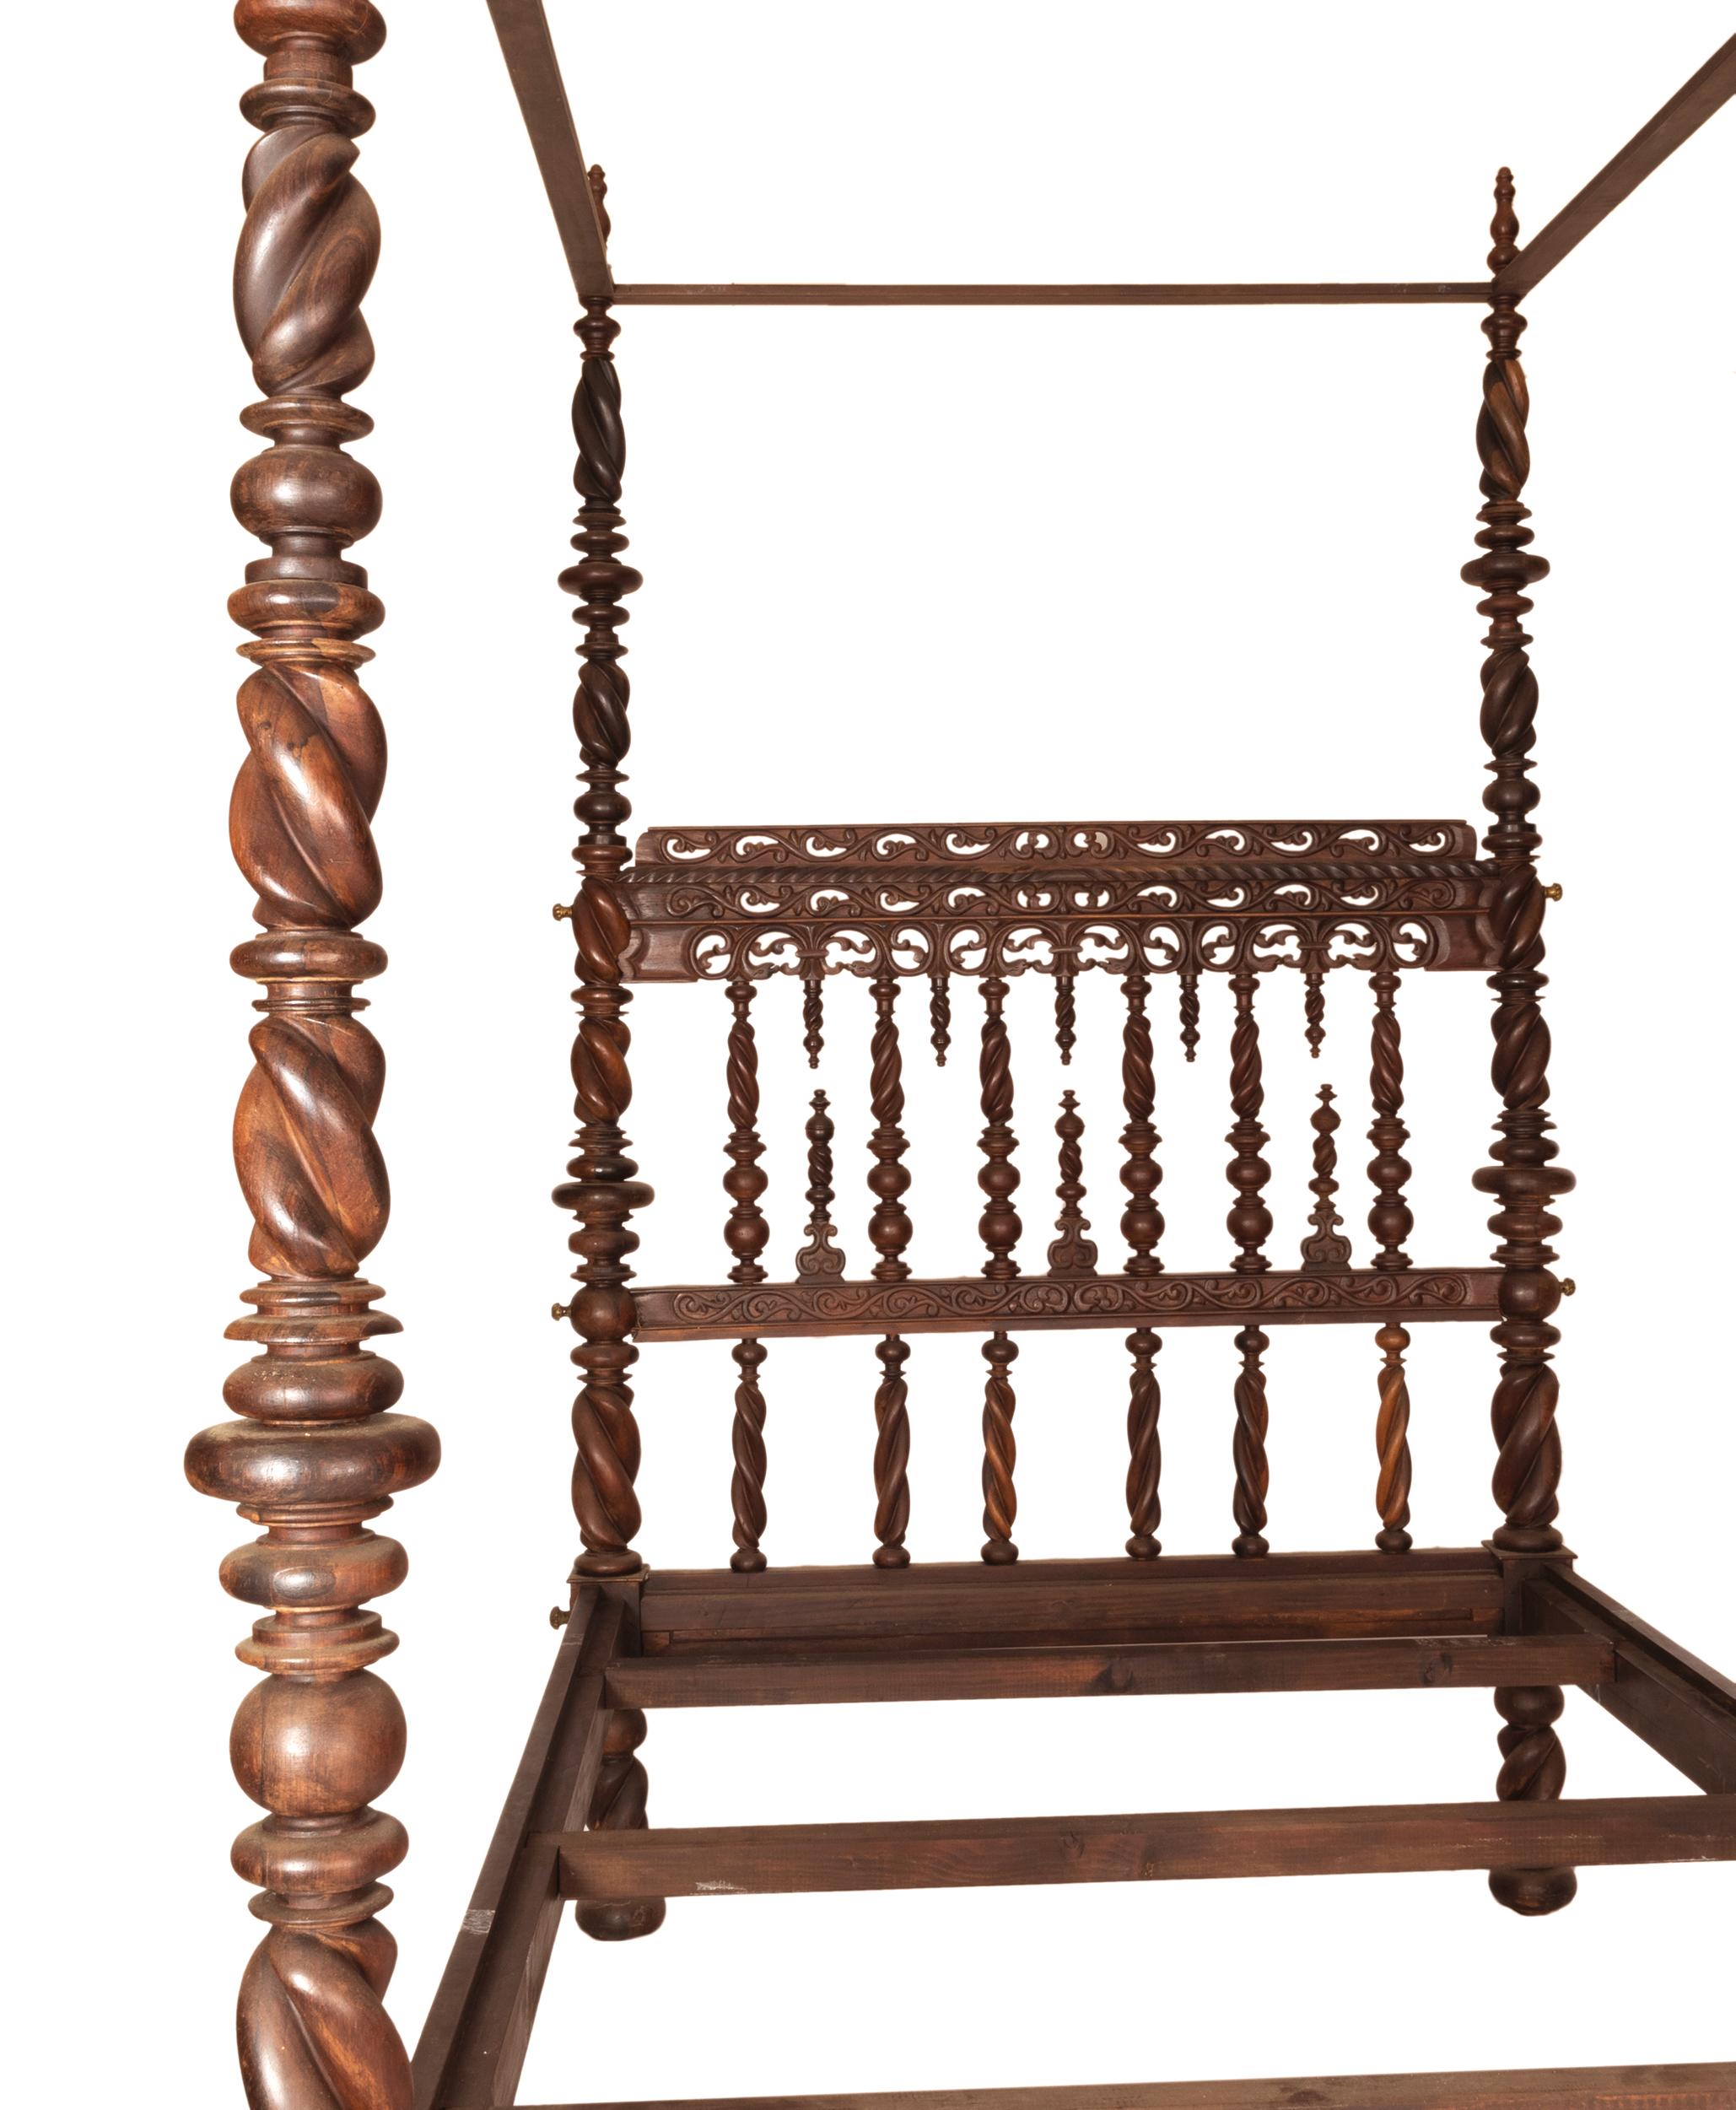 A 17th Century Baroque four-poster bed (ceiling), with headboard The headboard, decorated with boned shaped, shakes and strings, are turned into bobbin-shaped discs and balls in the sides and the legs of the bed. The columns are turned into balls,